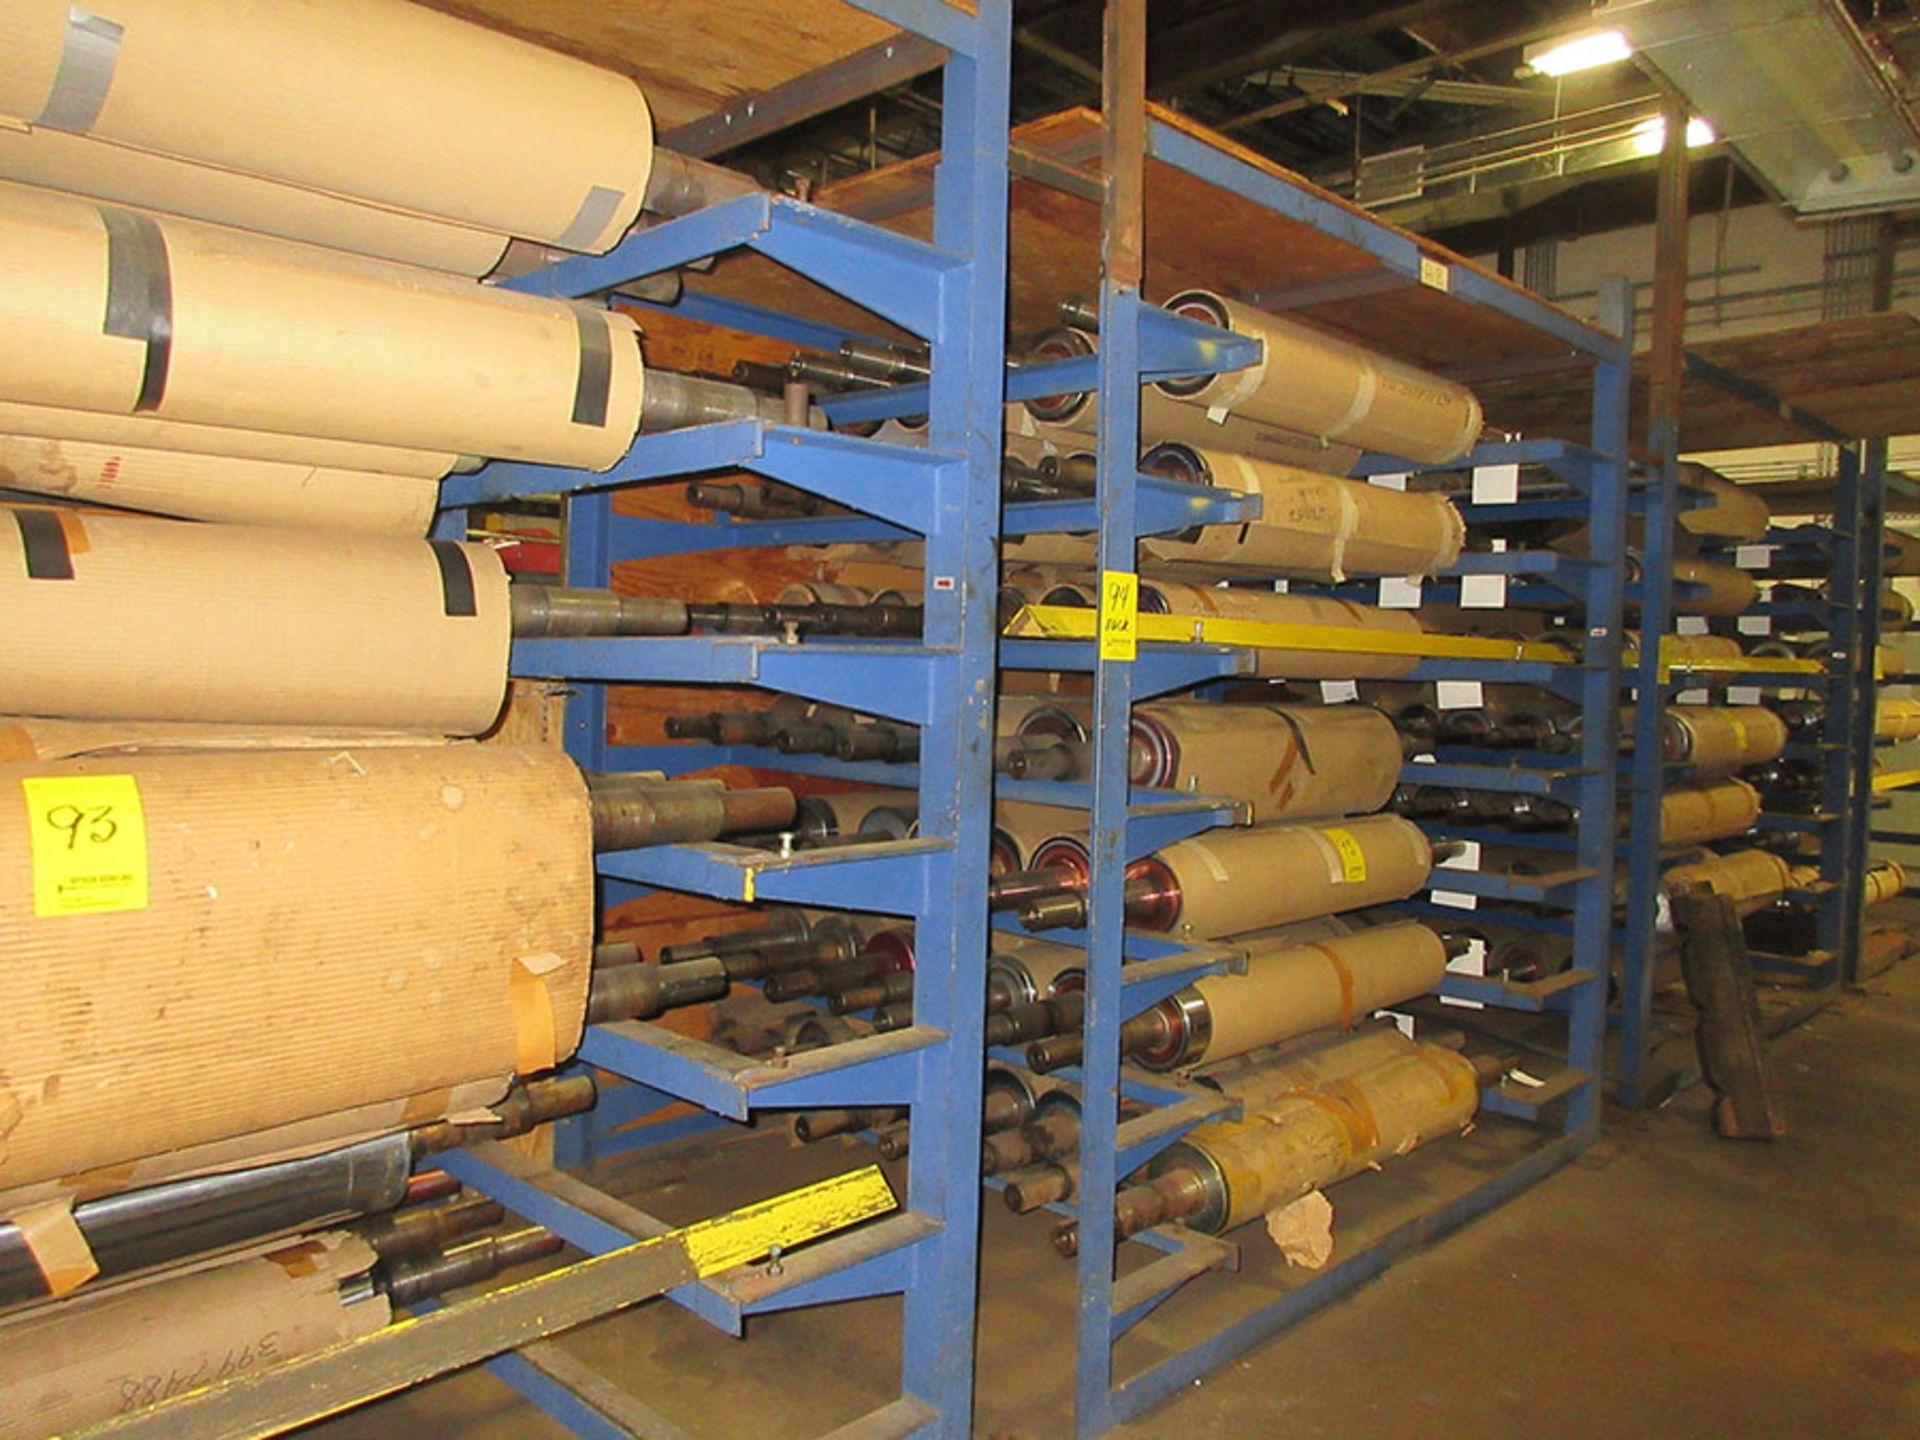 400 +/- ASSORTED PRINT ROLLERS, BASINS, BASIN CARTS, ALL OTHER ACCESSORIES PERTAINING TO PRINT